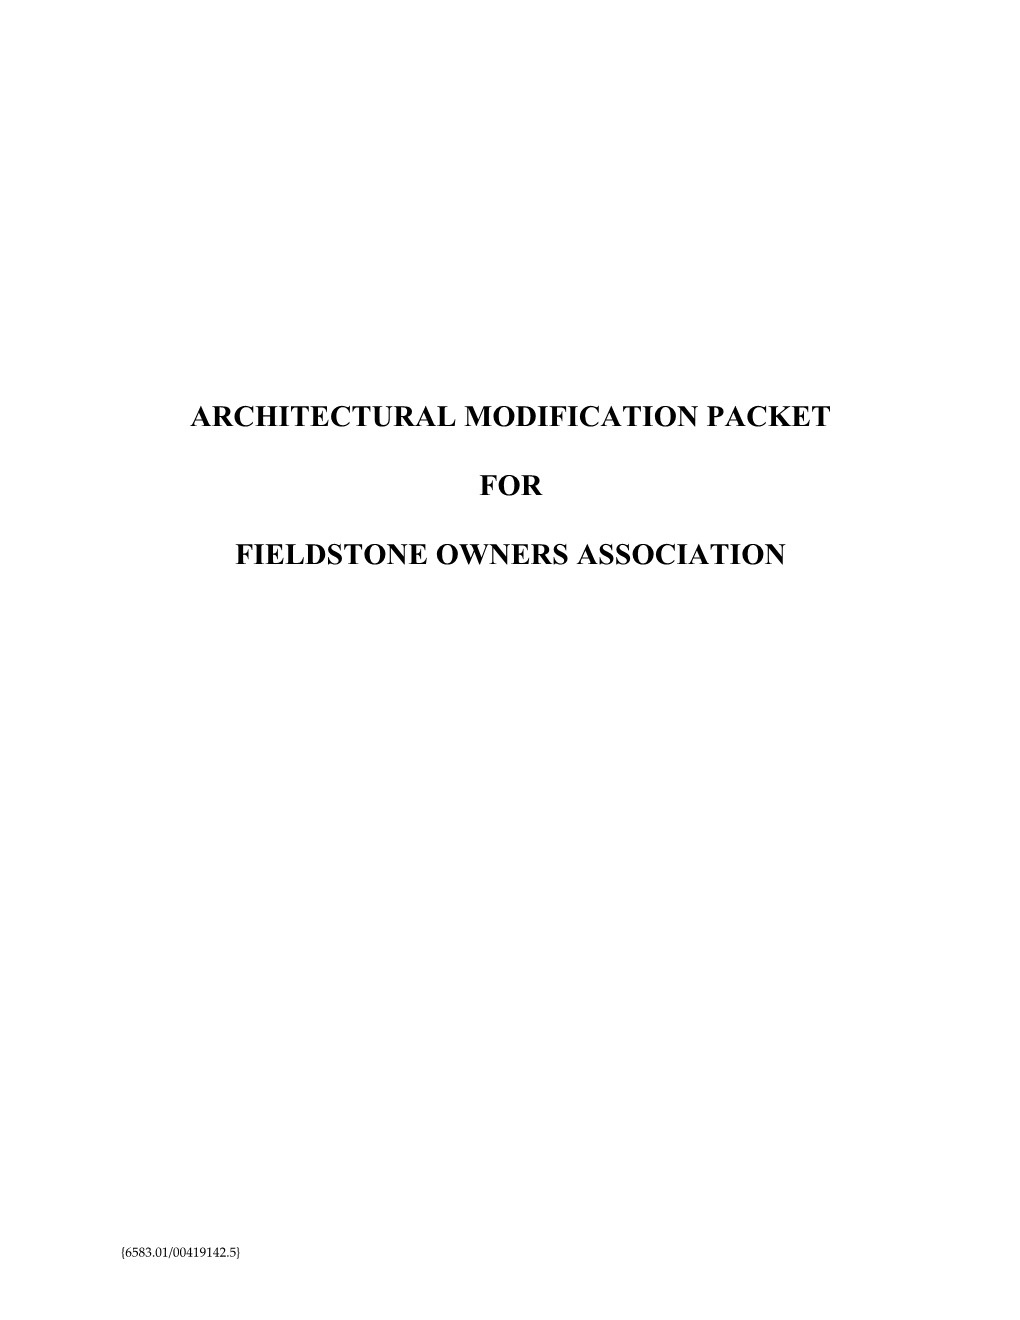 Architectural Modification Packet